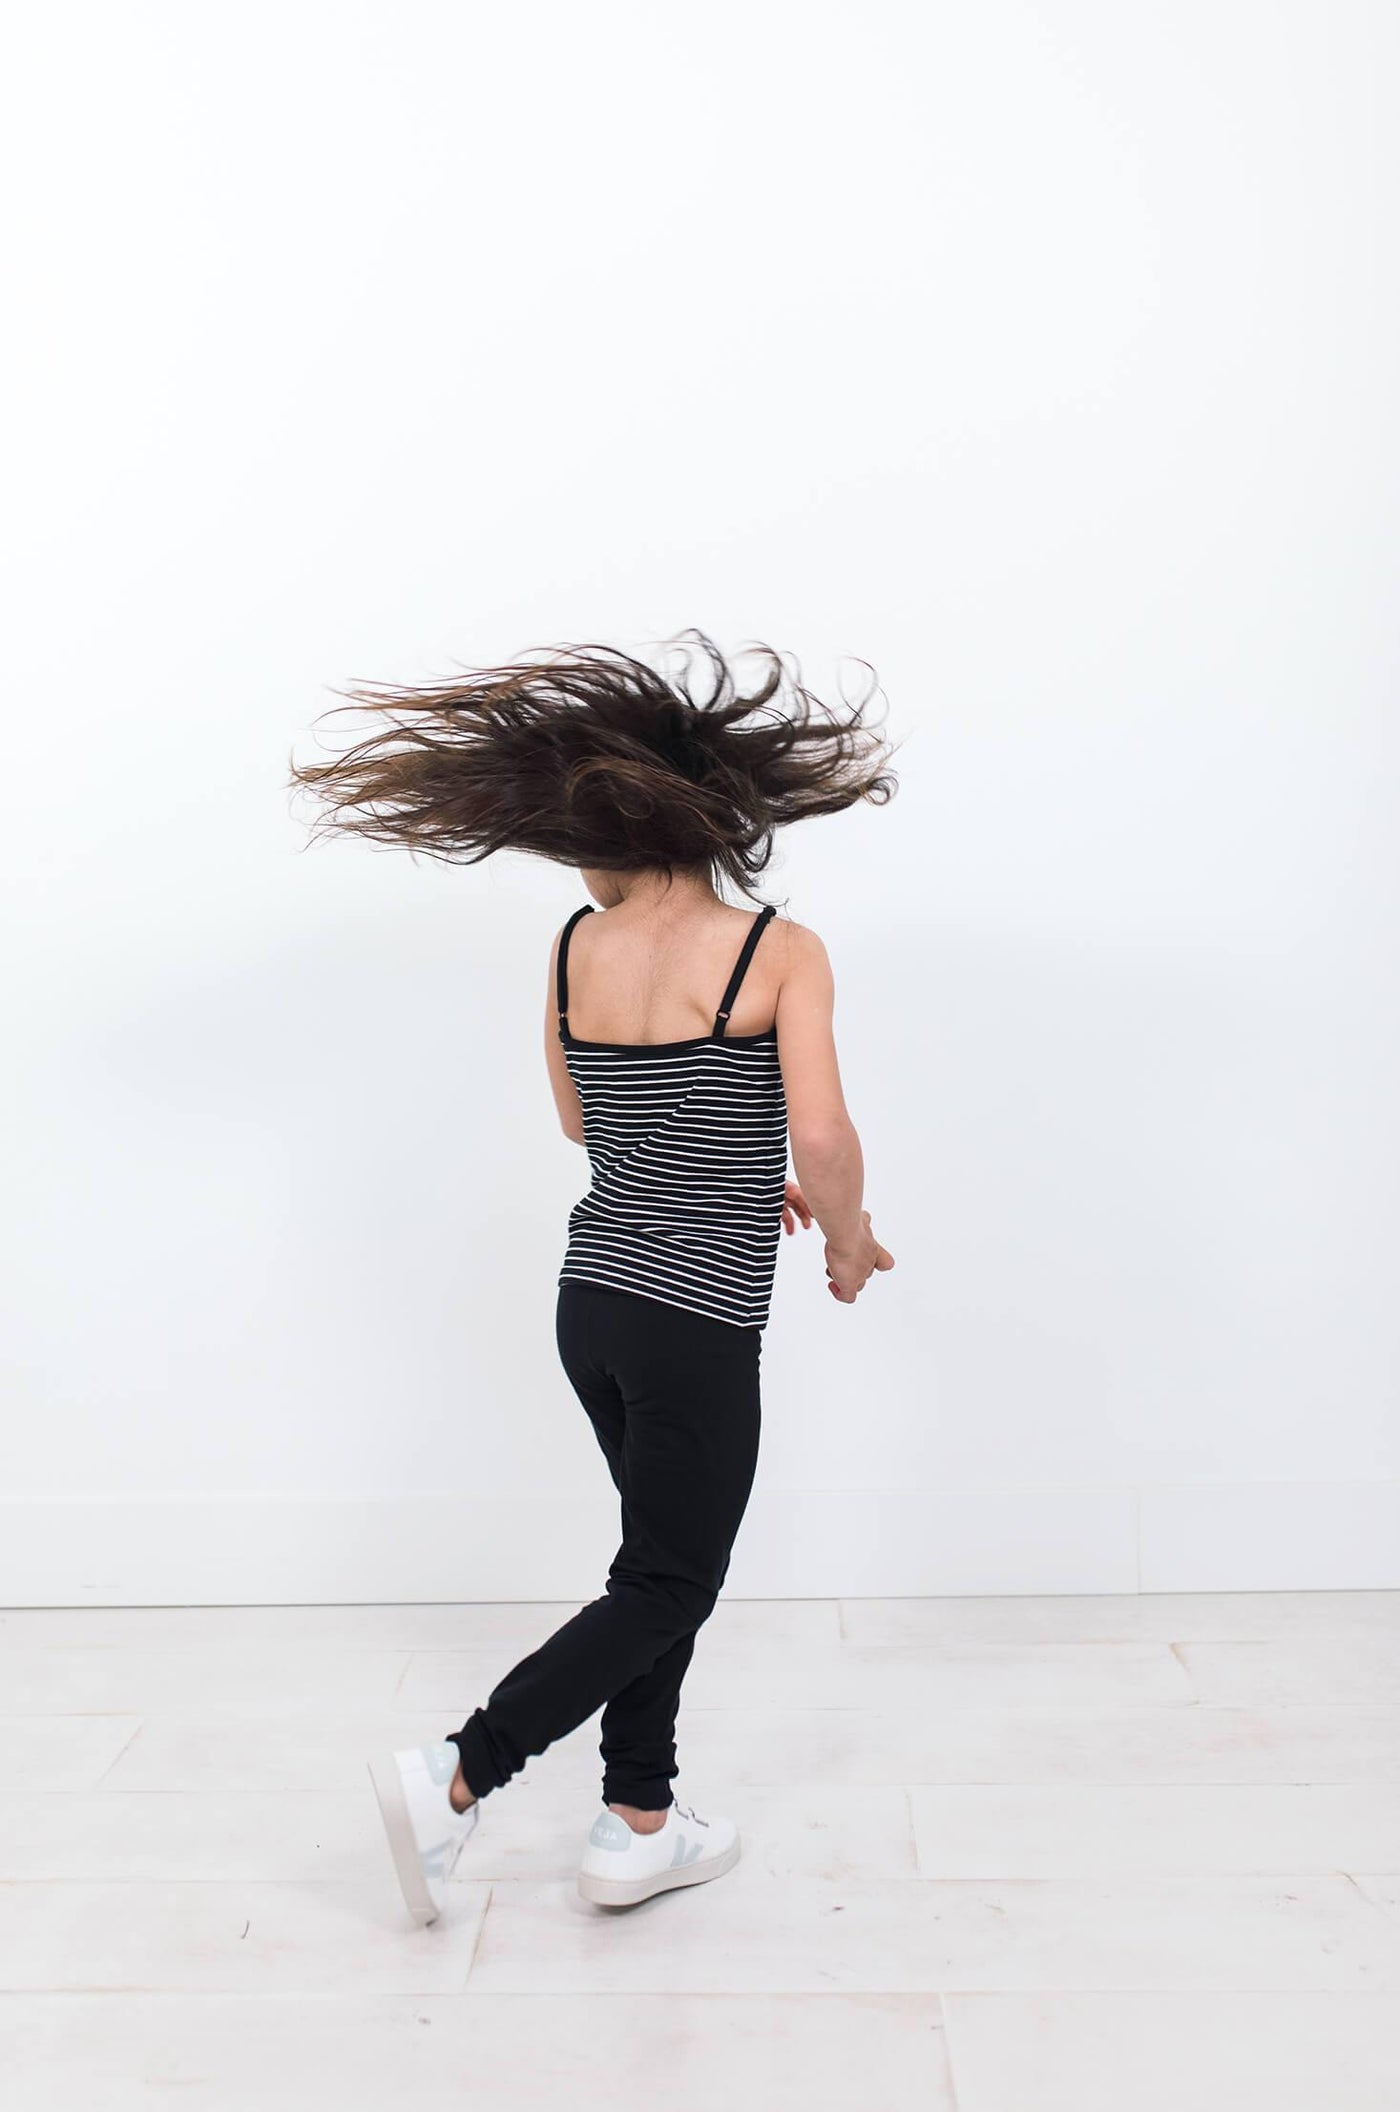 Girl spinning with long hair wearing black organic cotton cami with white stripes.